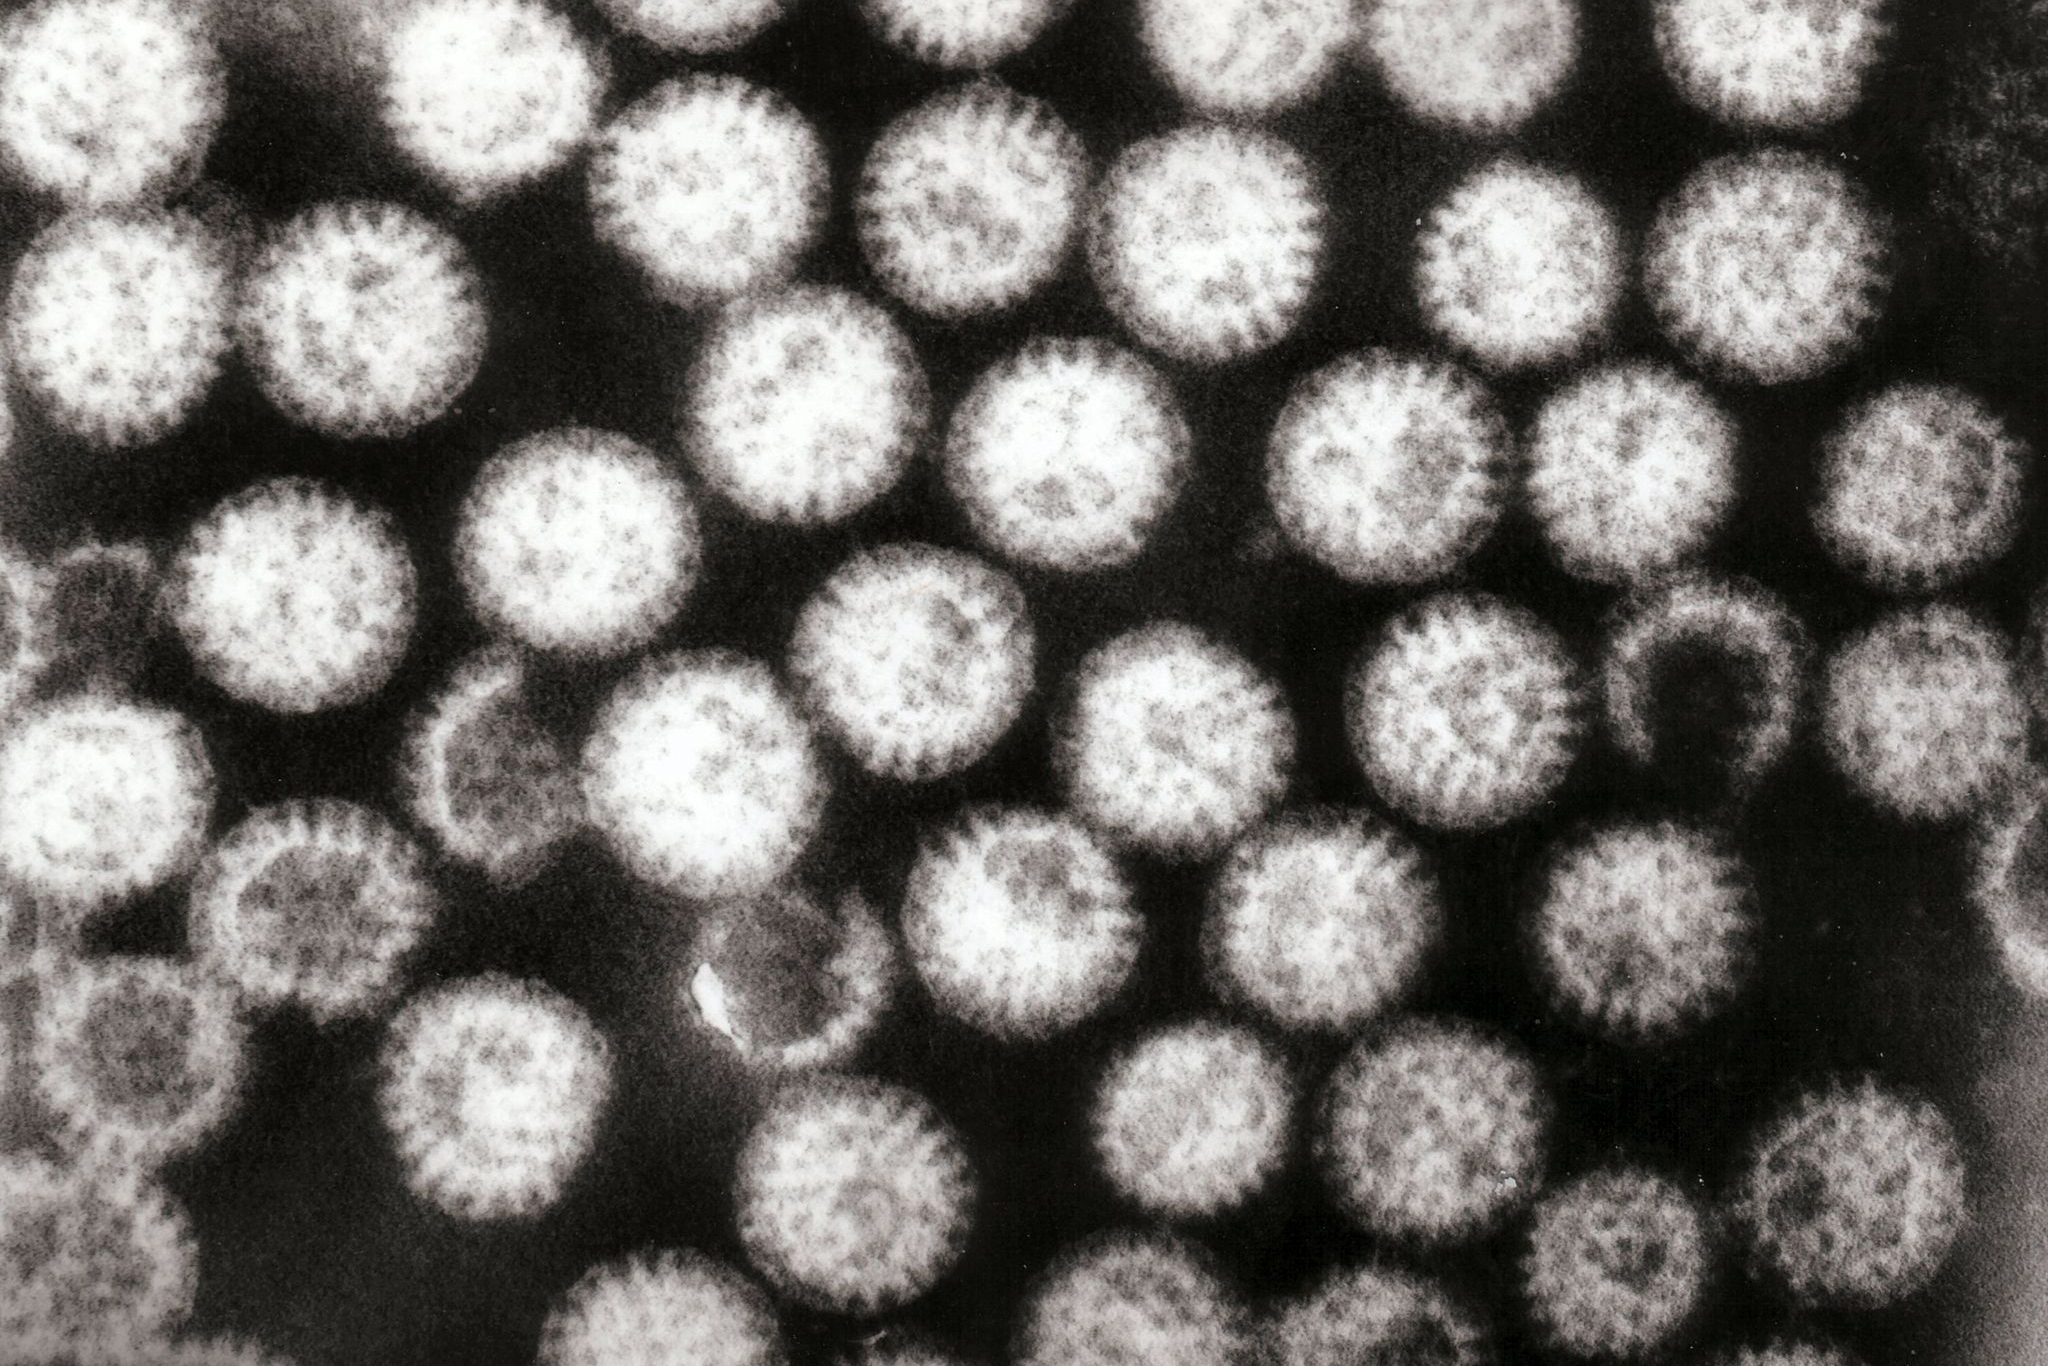 Transmission electron micrograph of multiple rotavirus particles. Credit: Dr. Graham Beards